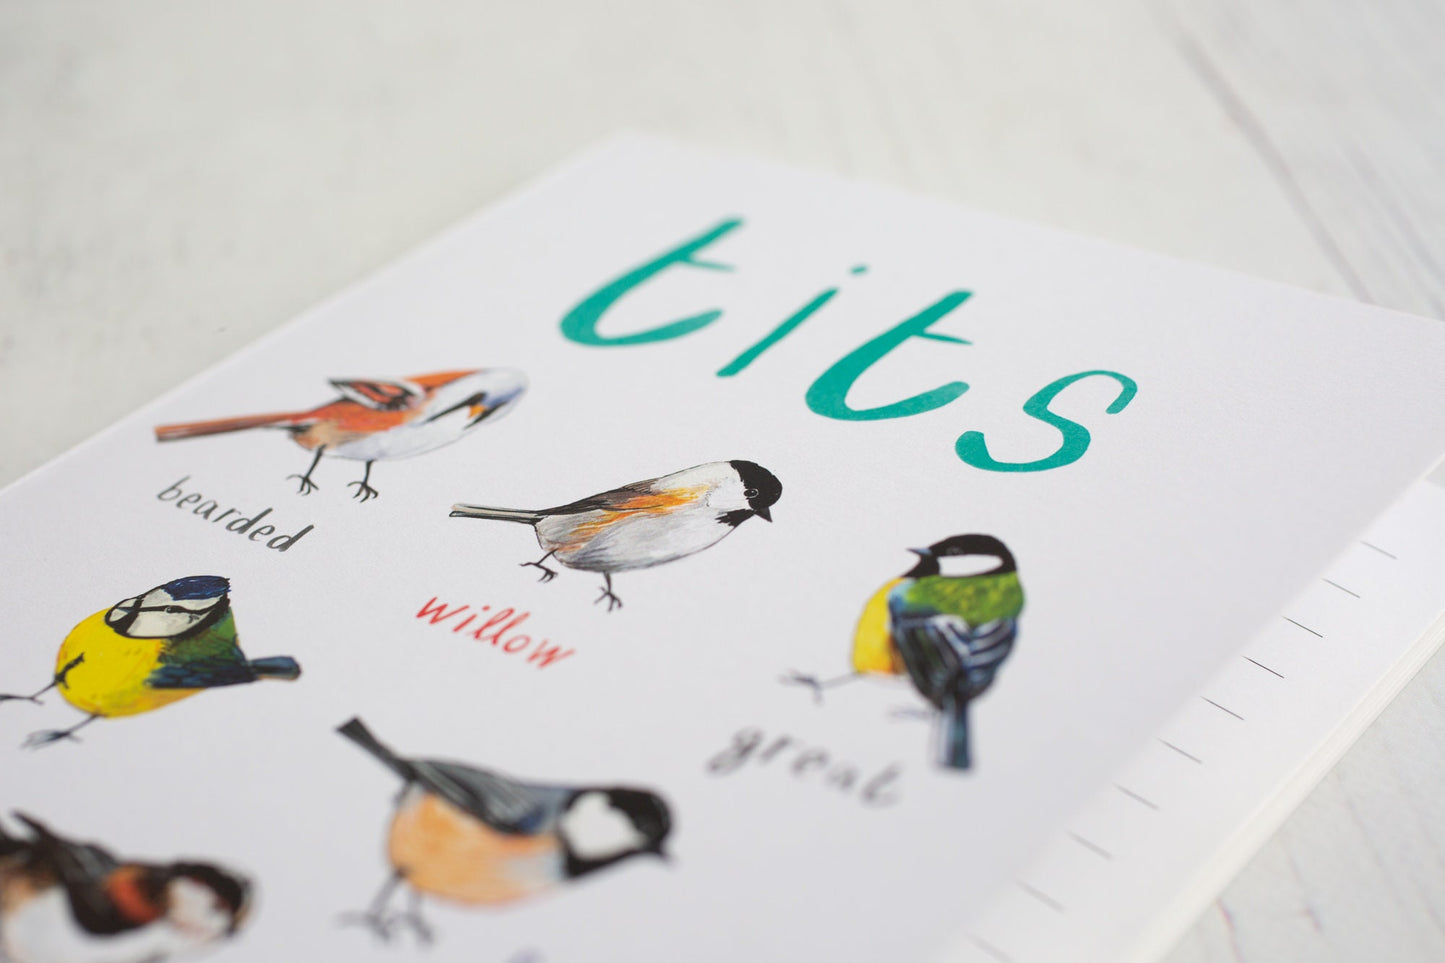 Tits A5 Recycled Bird Notebook